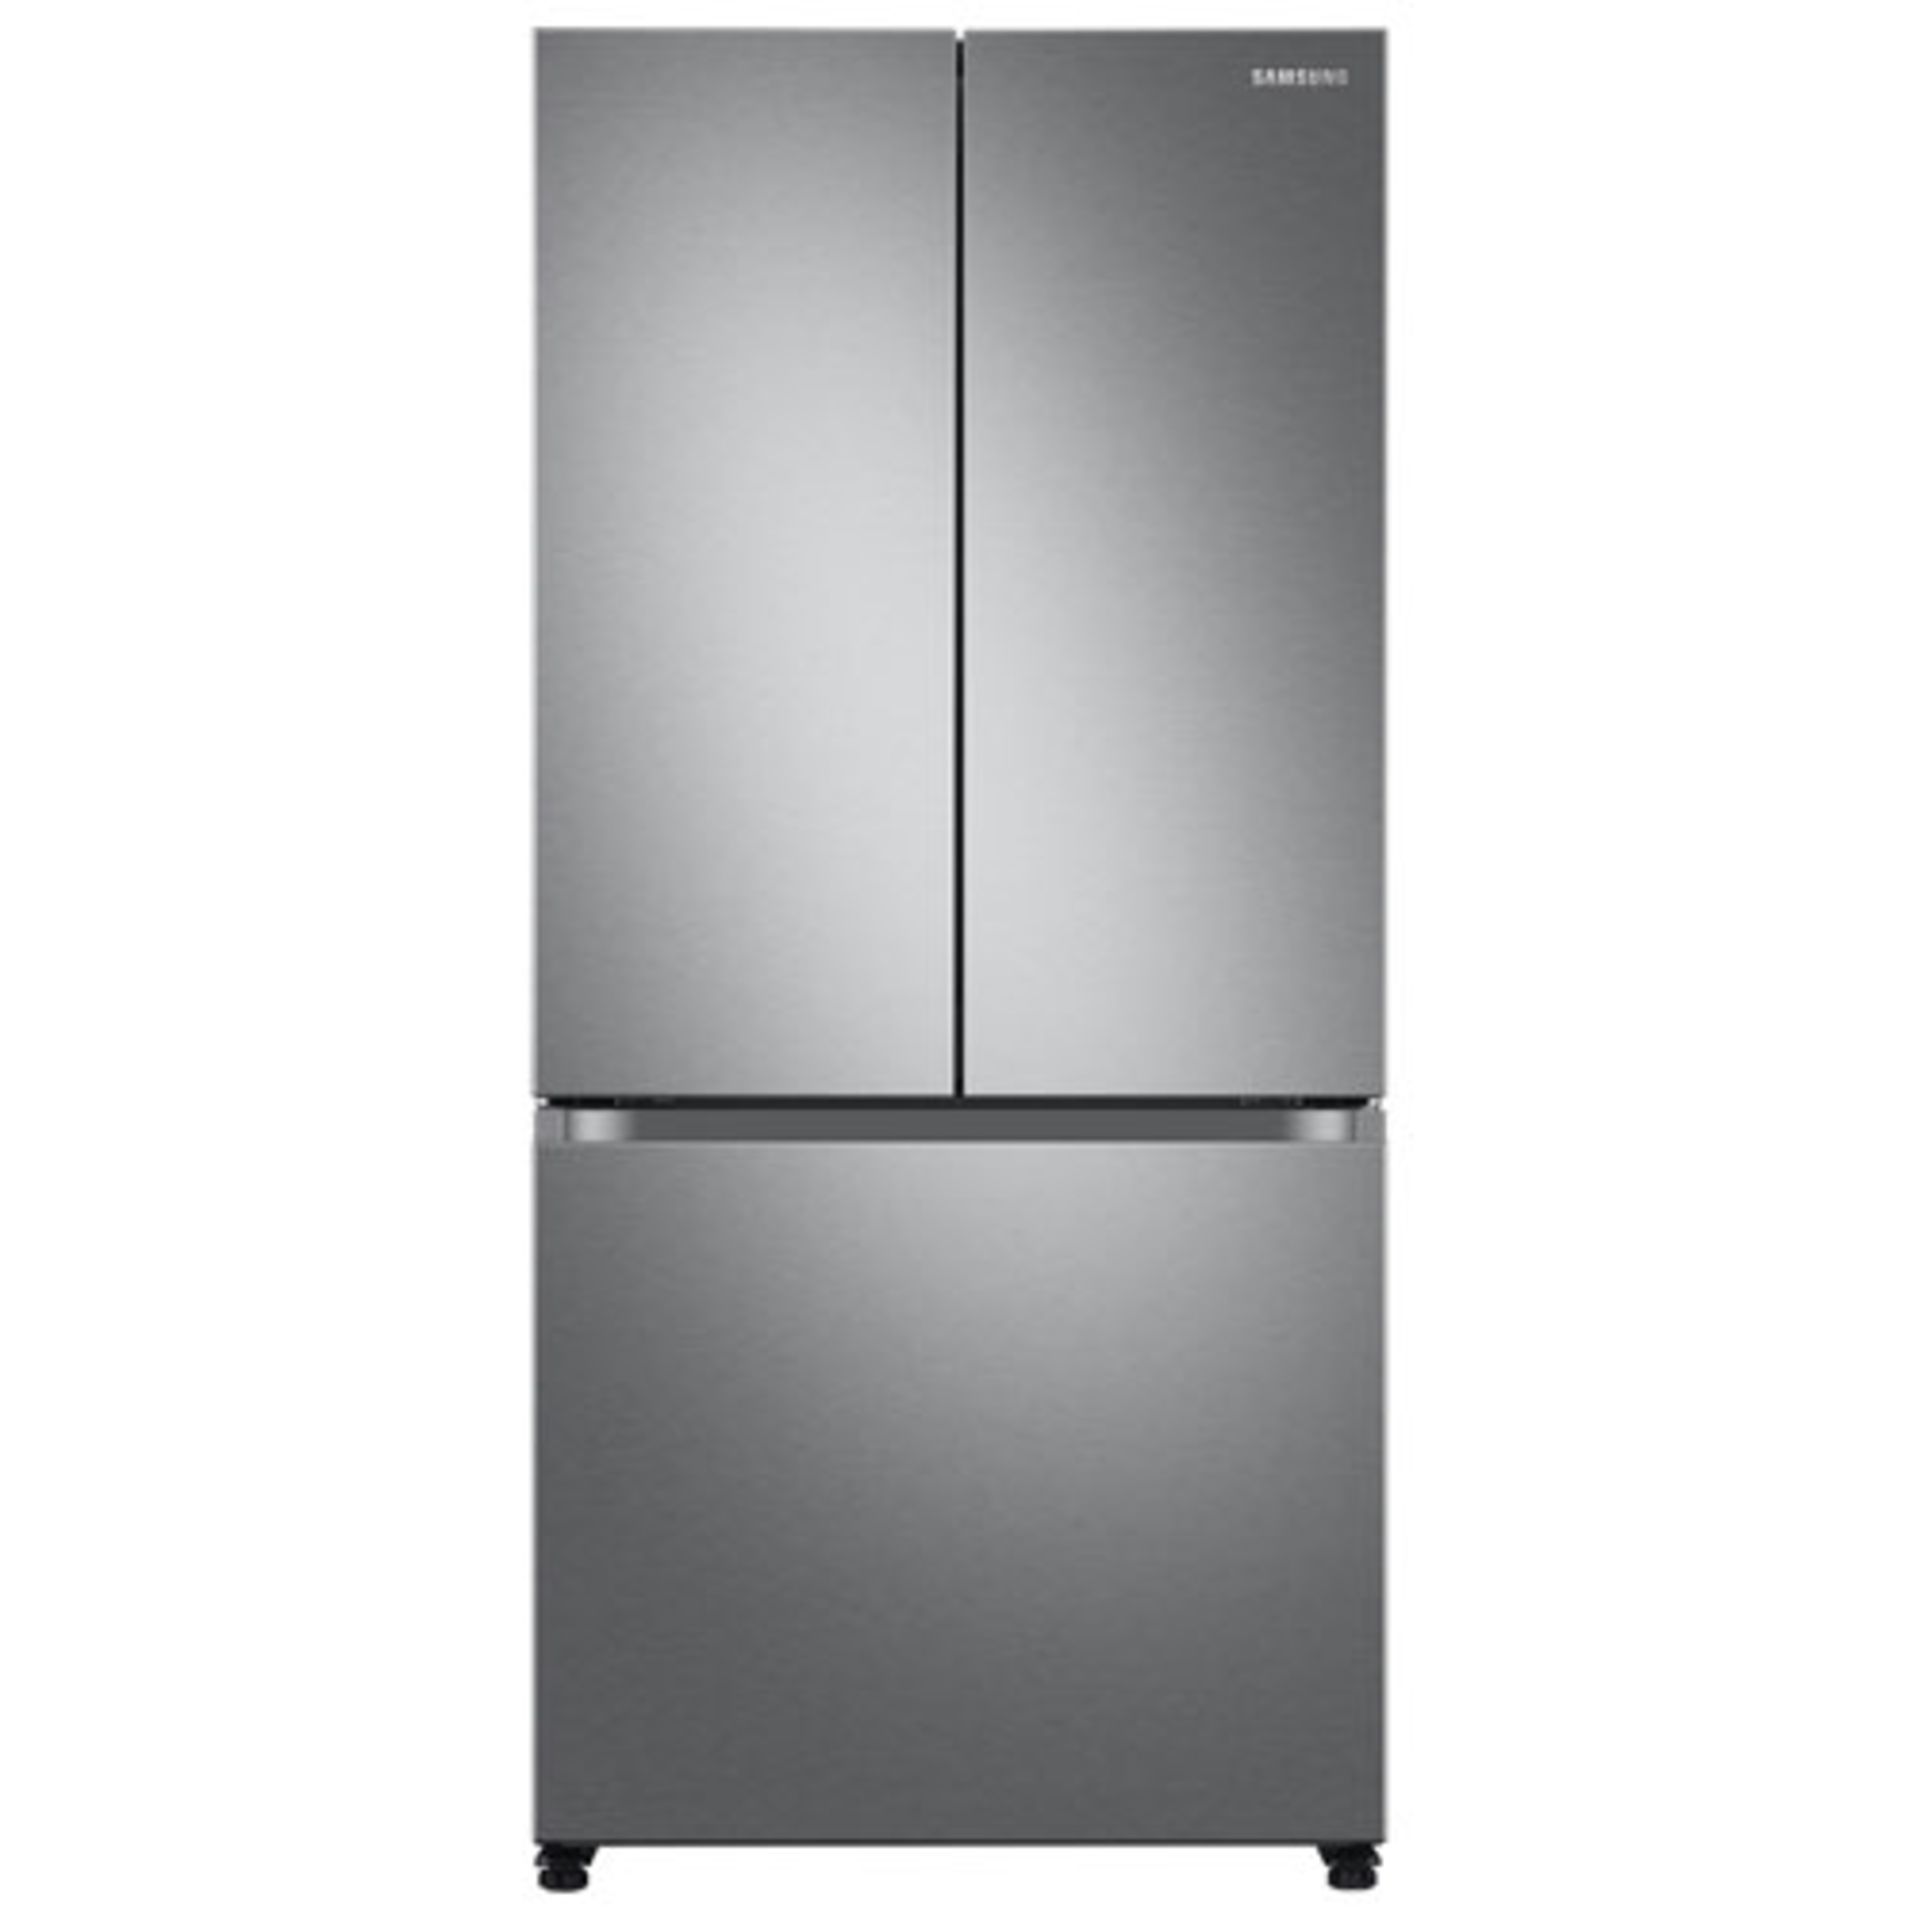 Samsung 33" 17.5 Cu. Ft. Counter-Depth French Door Refrigerator with Ice Dispenser Stainless